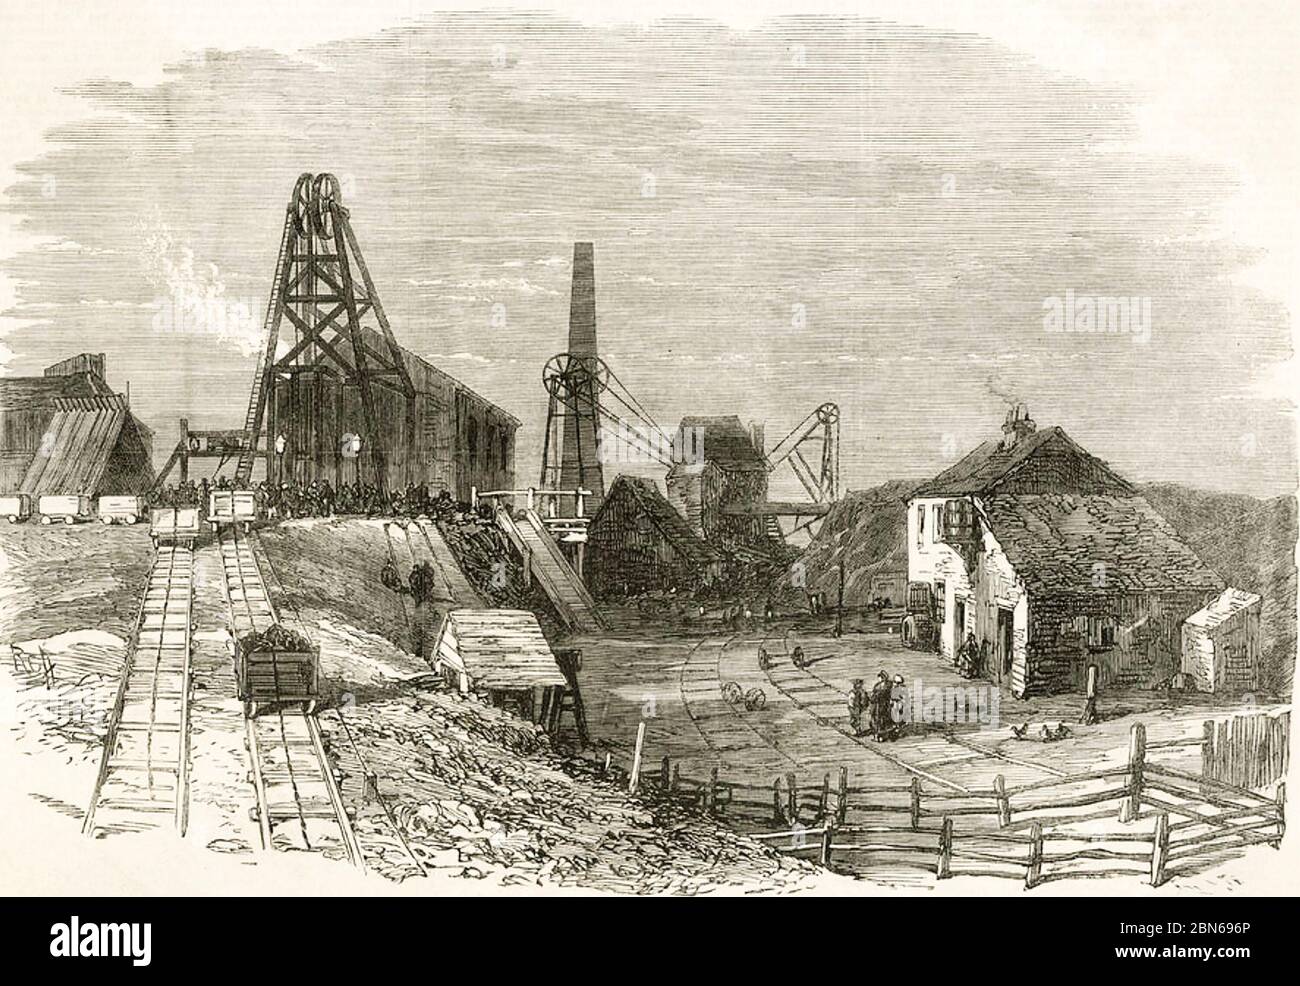 DUKINFIELD COLLIERY, Lancashire. Site of the 1867 mining disaster which killed 36 workers. Stock Photo